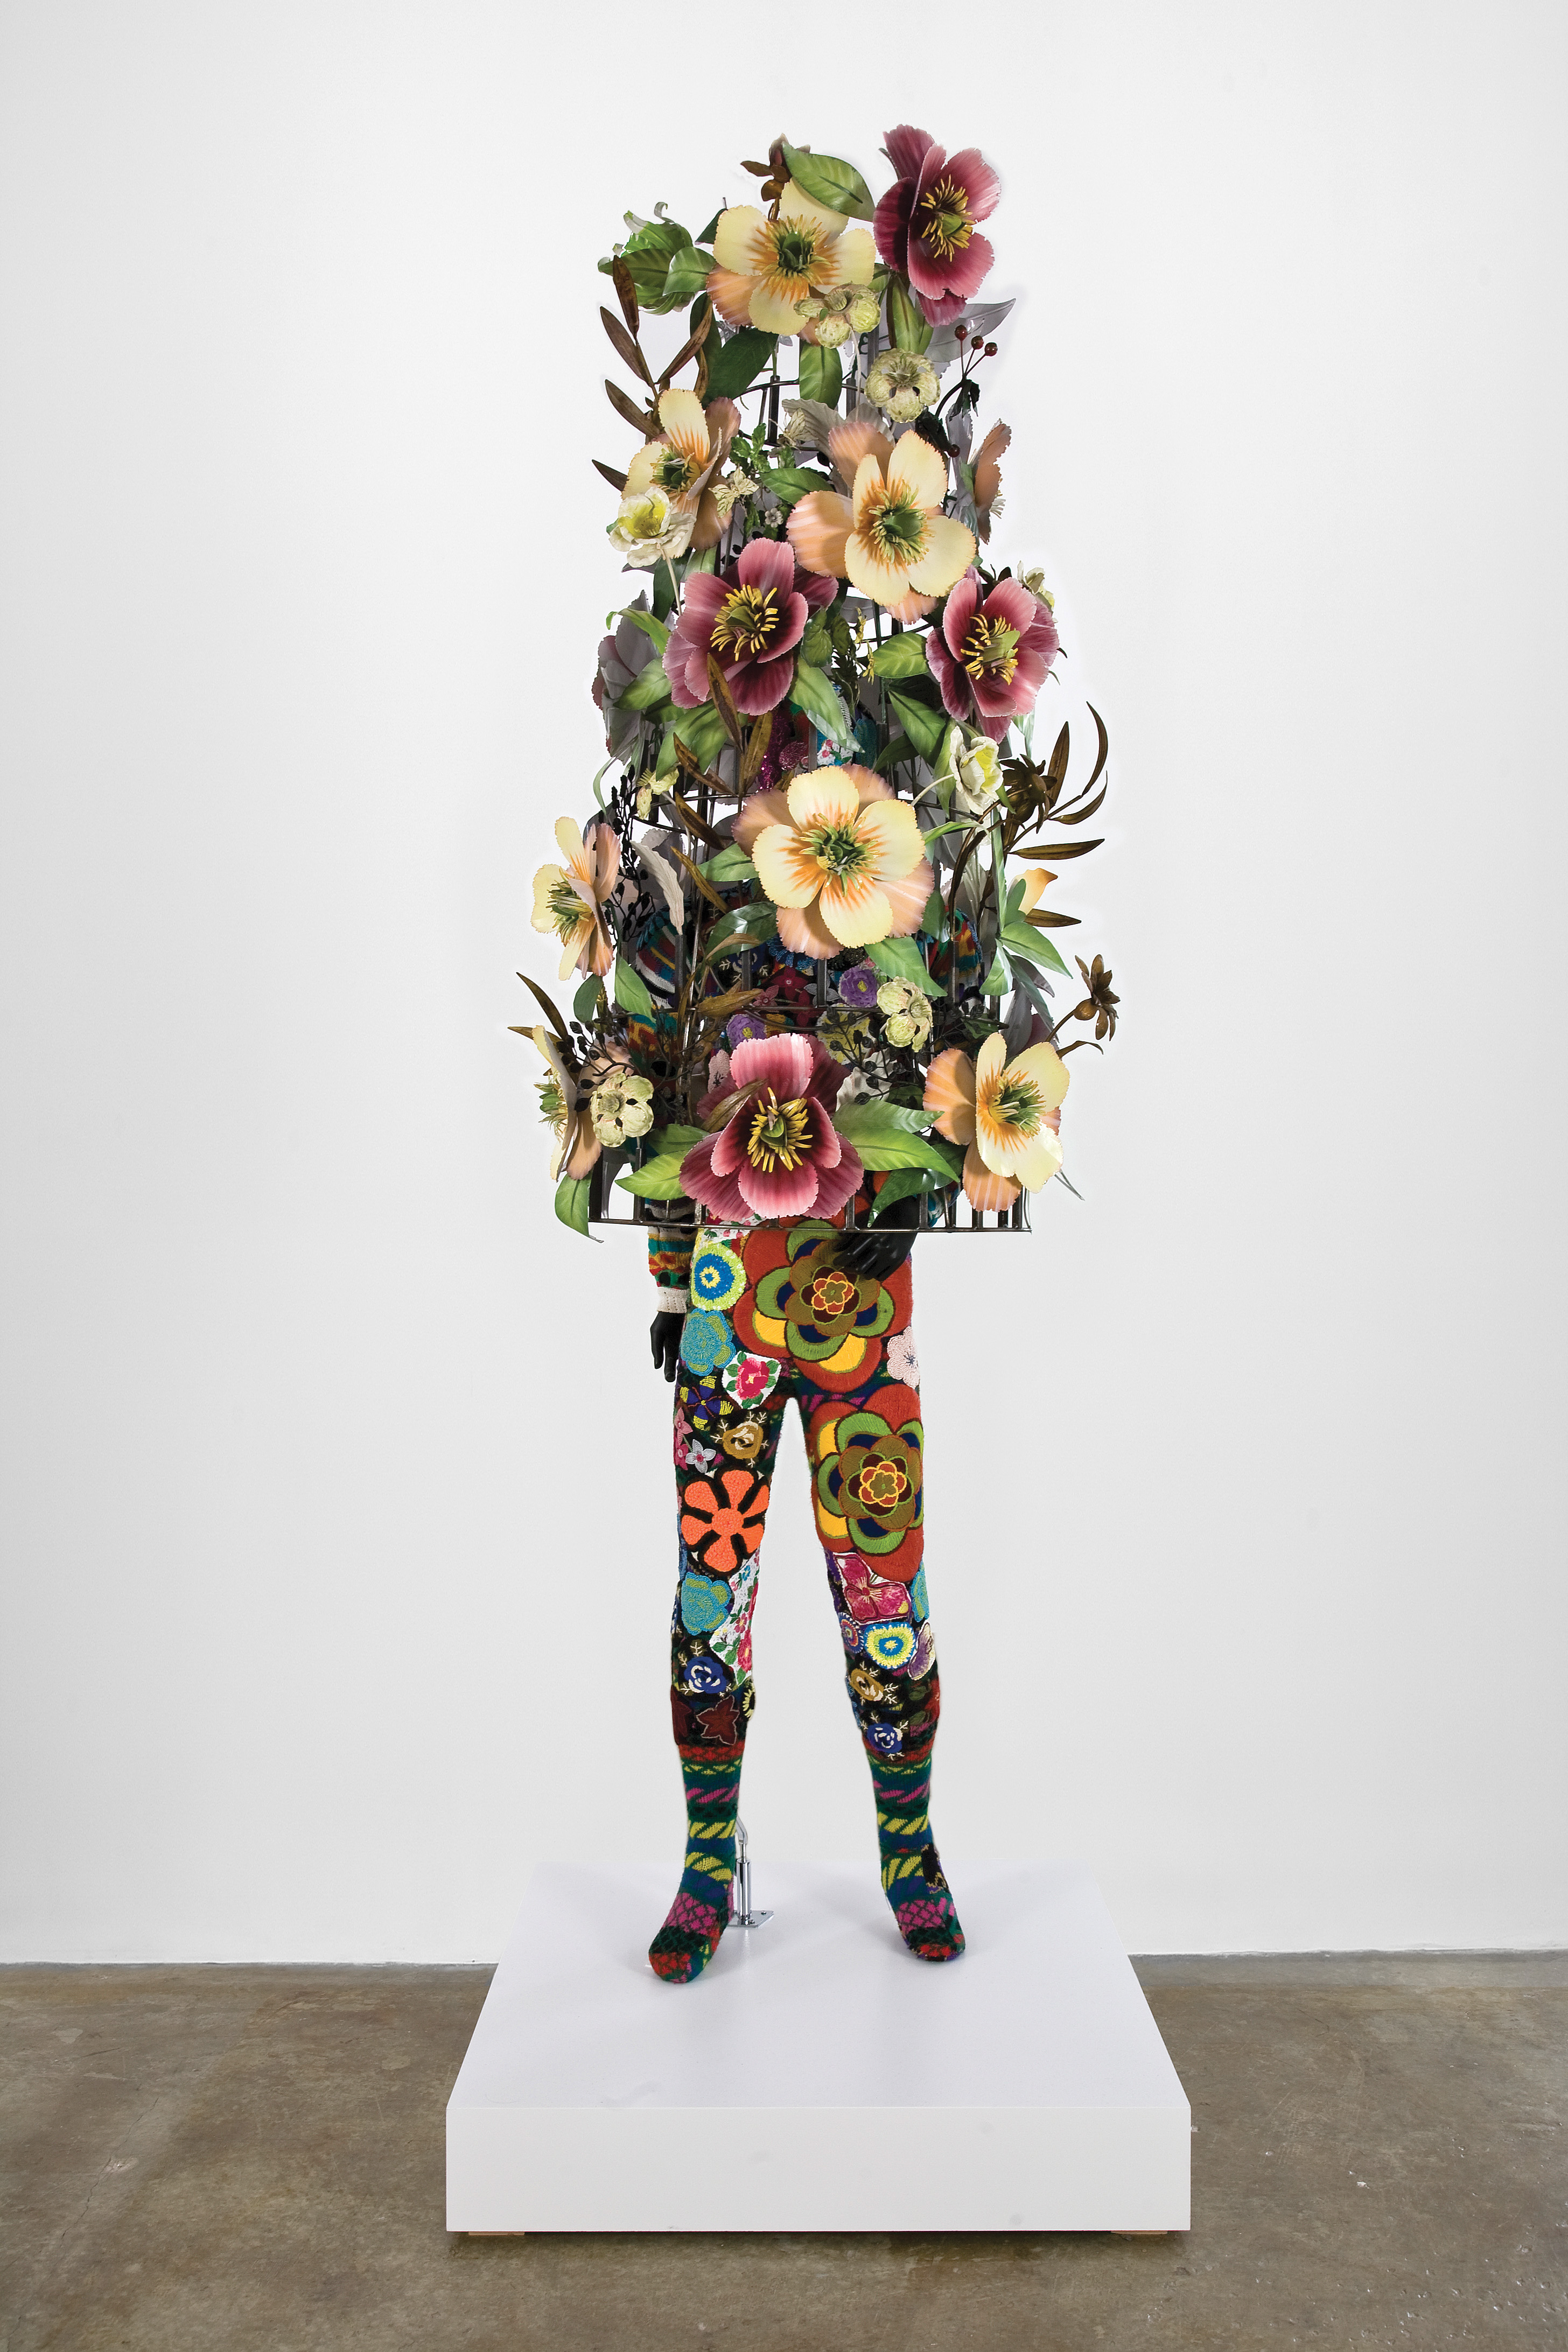 Flowers cover top half of a figure while they wear a floral-patterned pair of tights